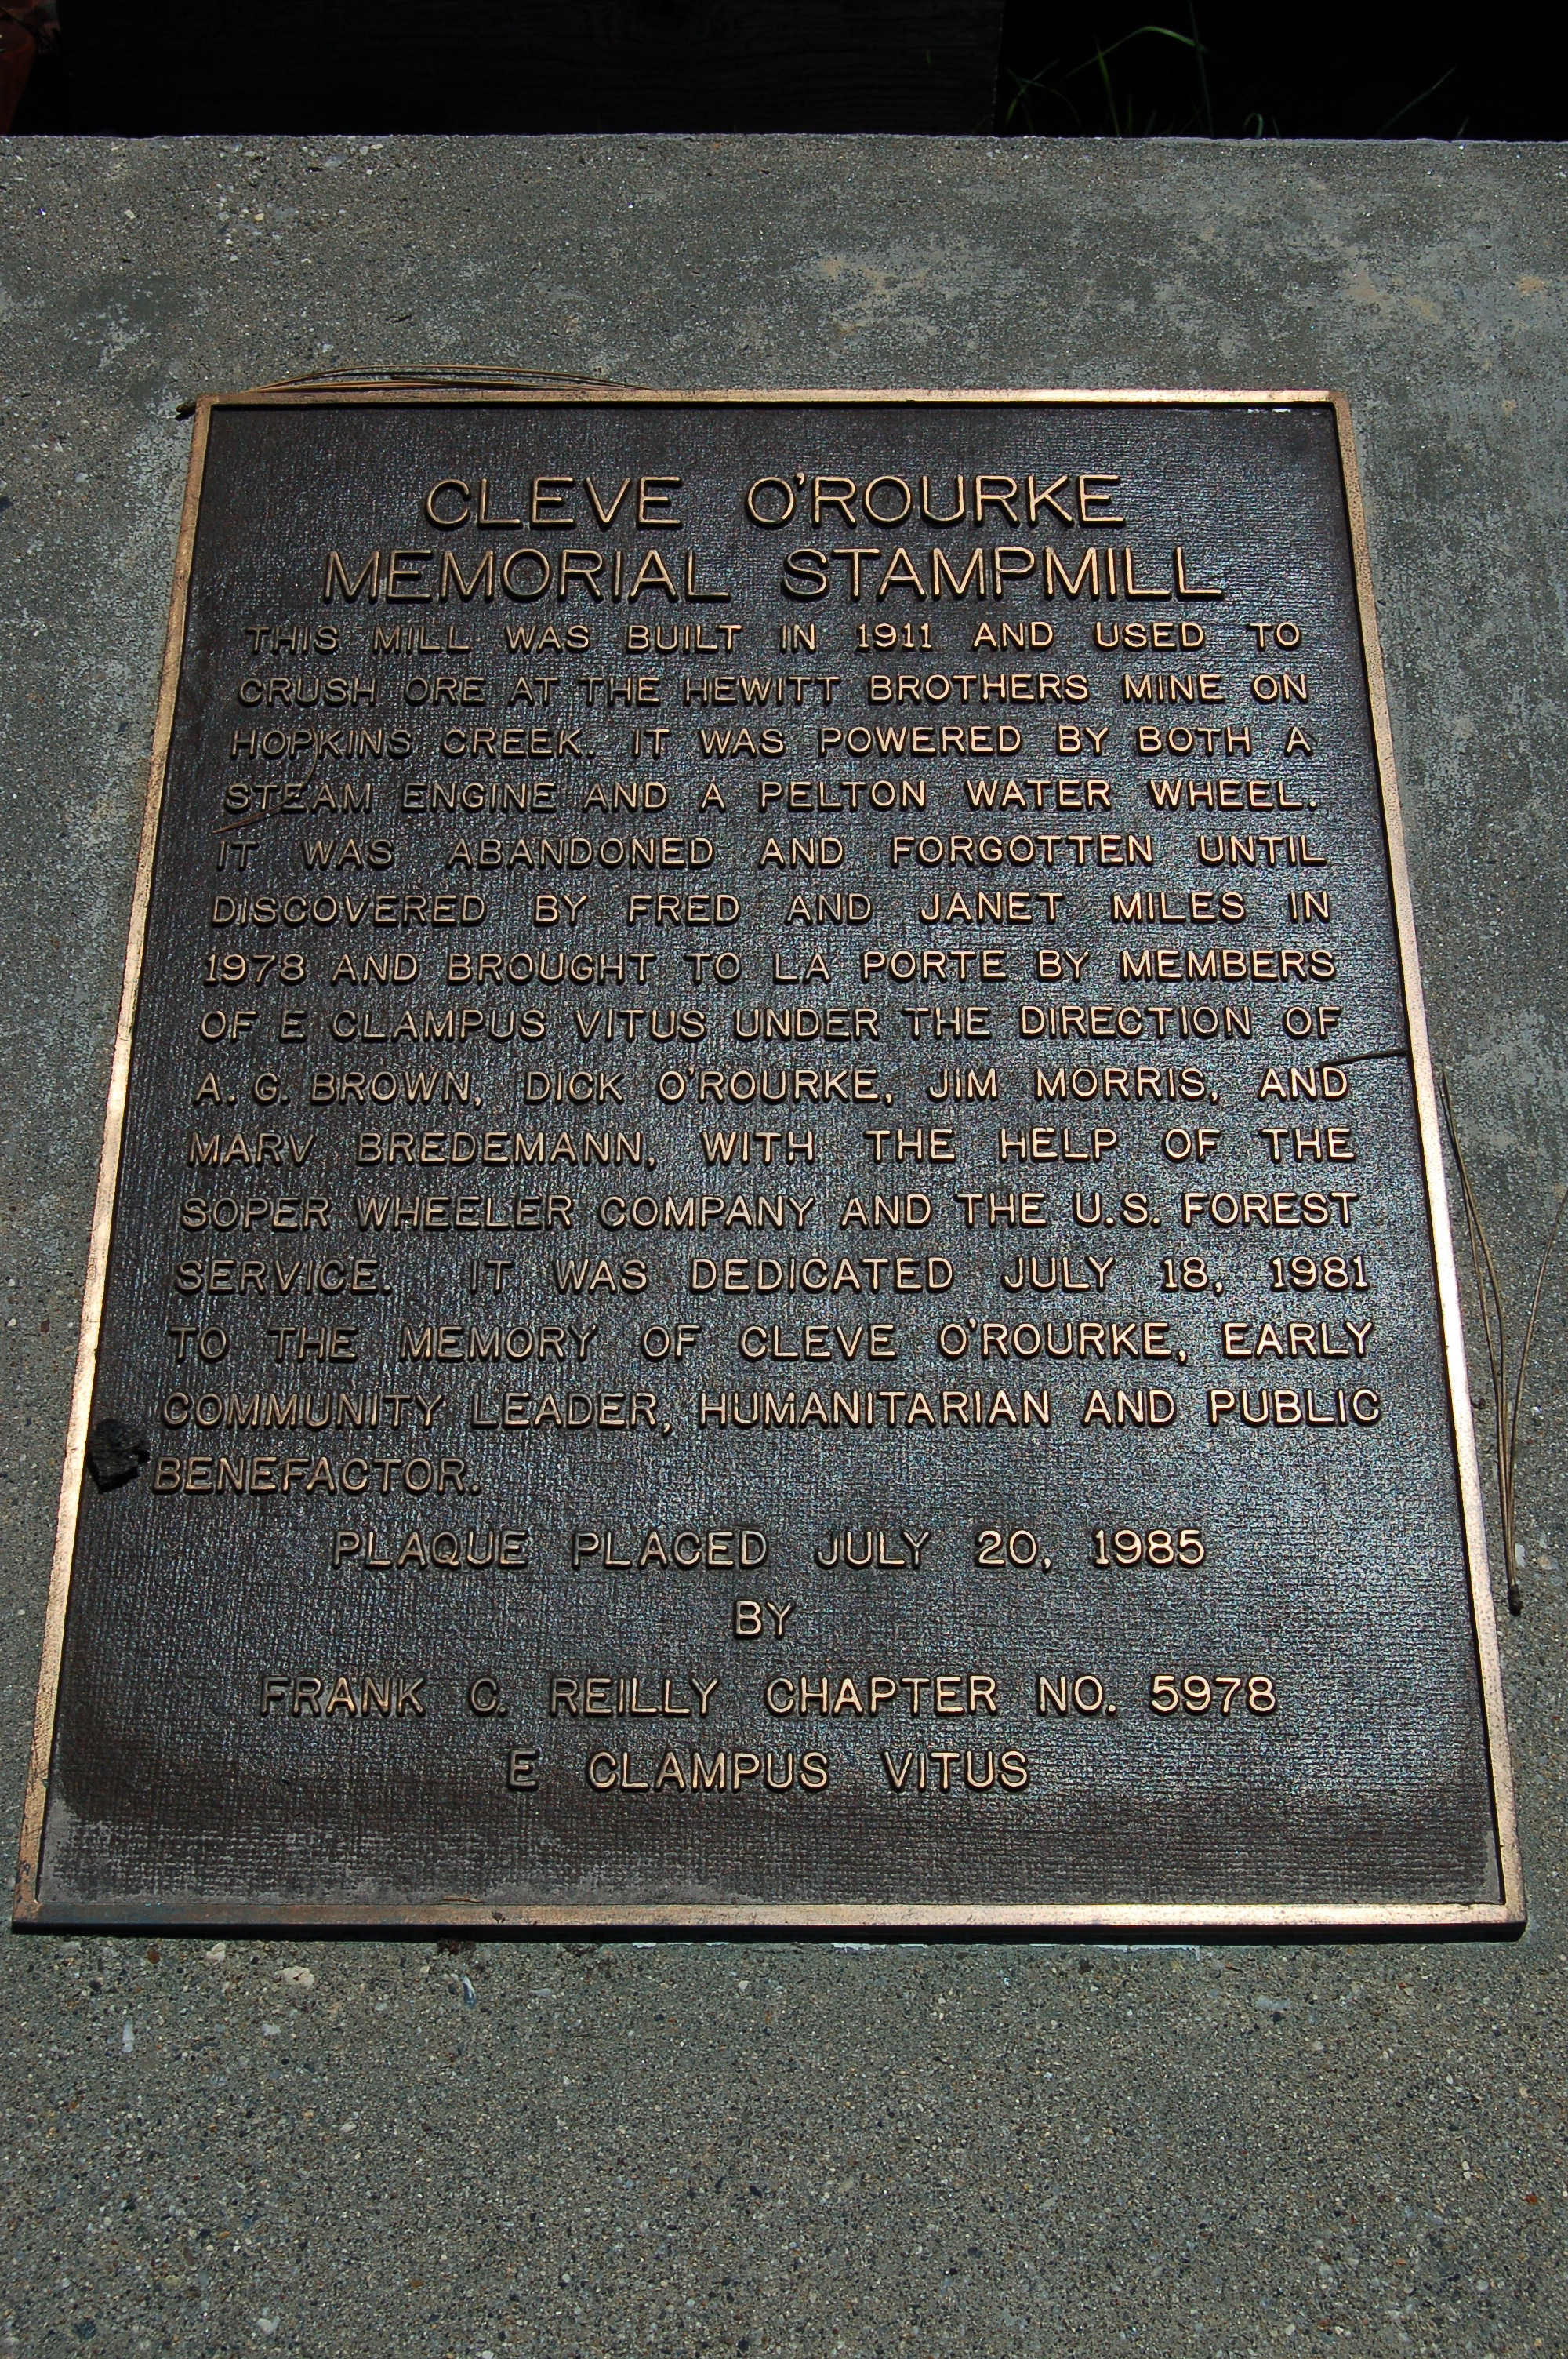 Cleve O’Rourke Memorial Stampmill Marker